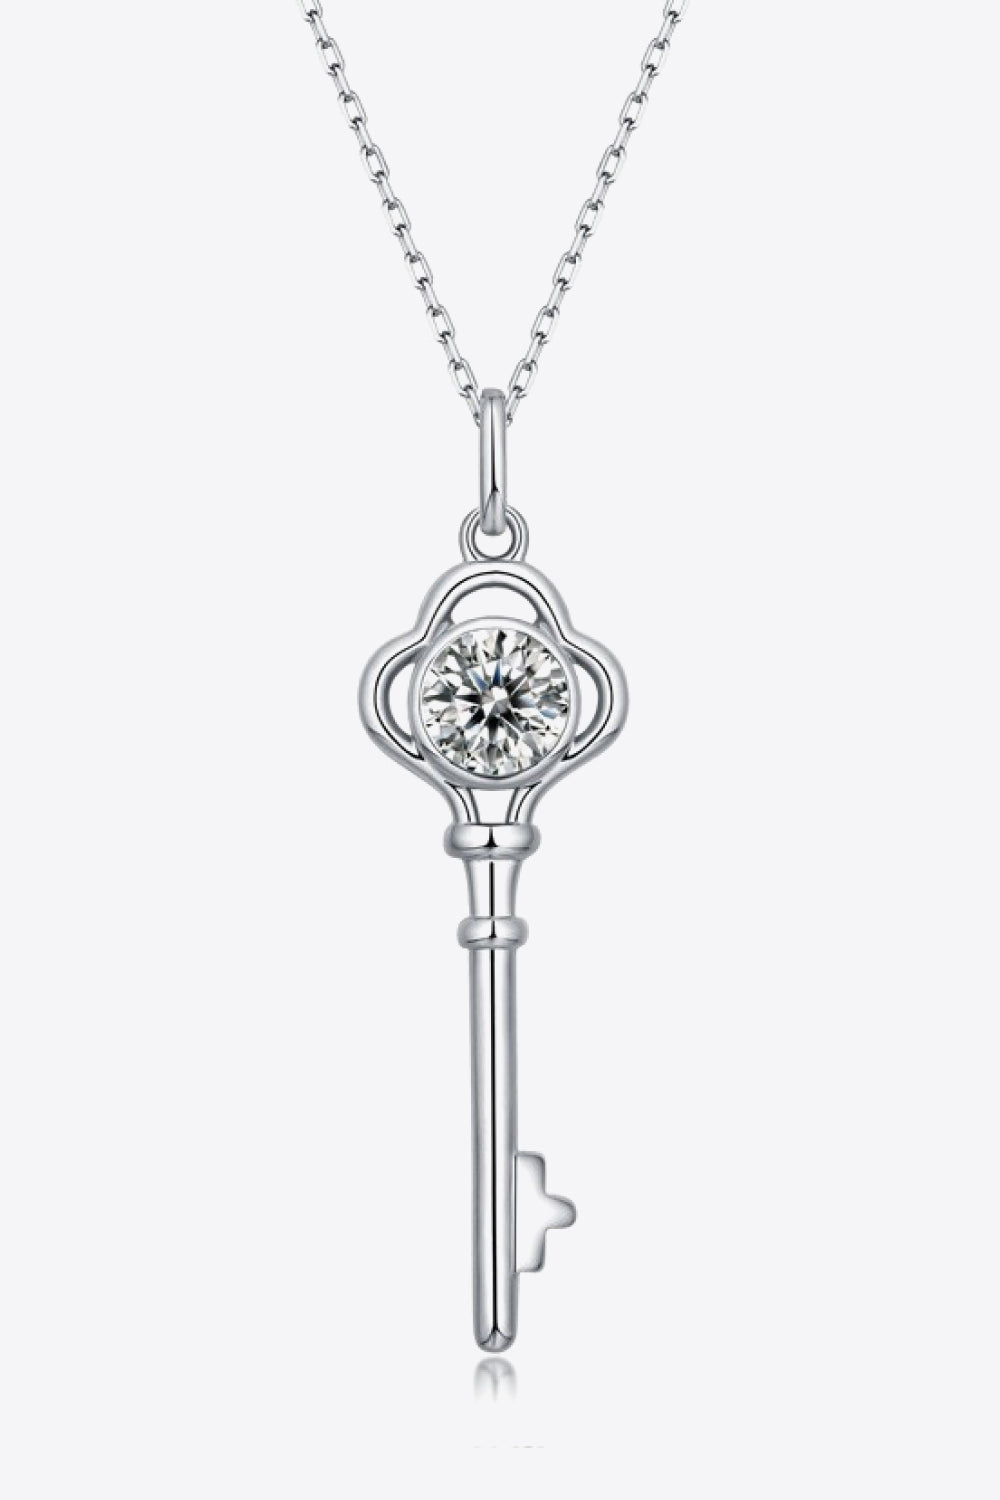 Trendsi Chain Necklaces Silver / One Size 925 Sterling Silver 1 Carat Moissanite Key Pendant Necklace